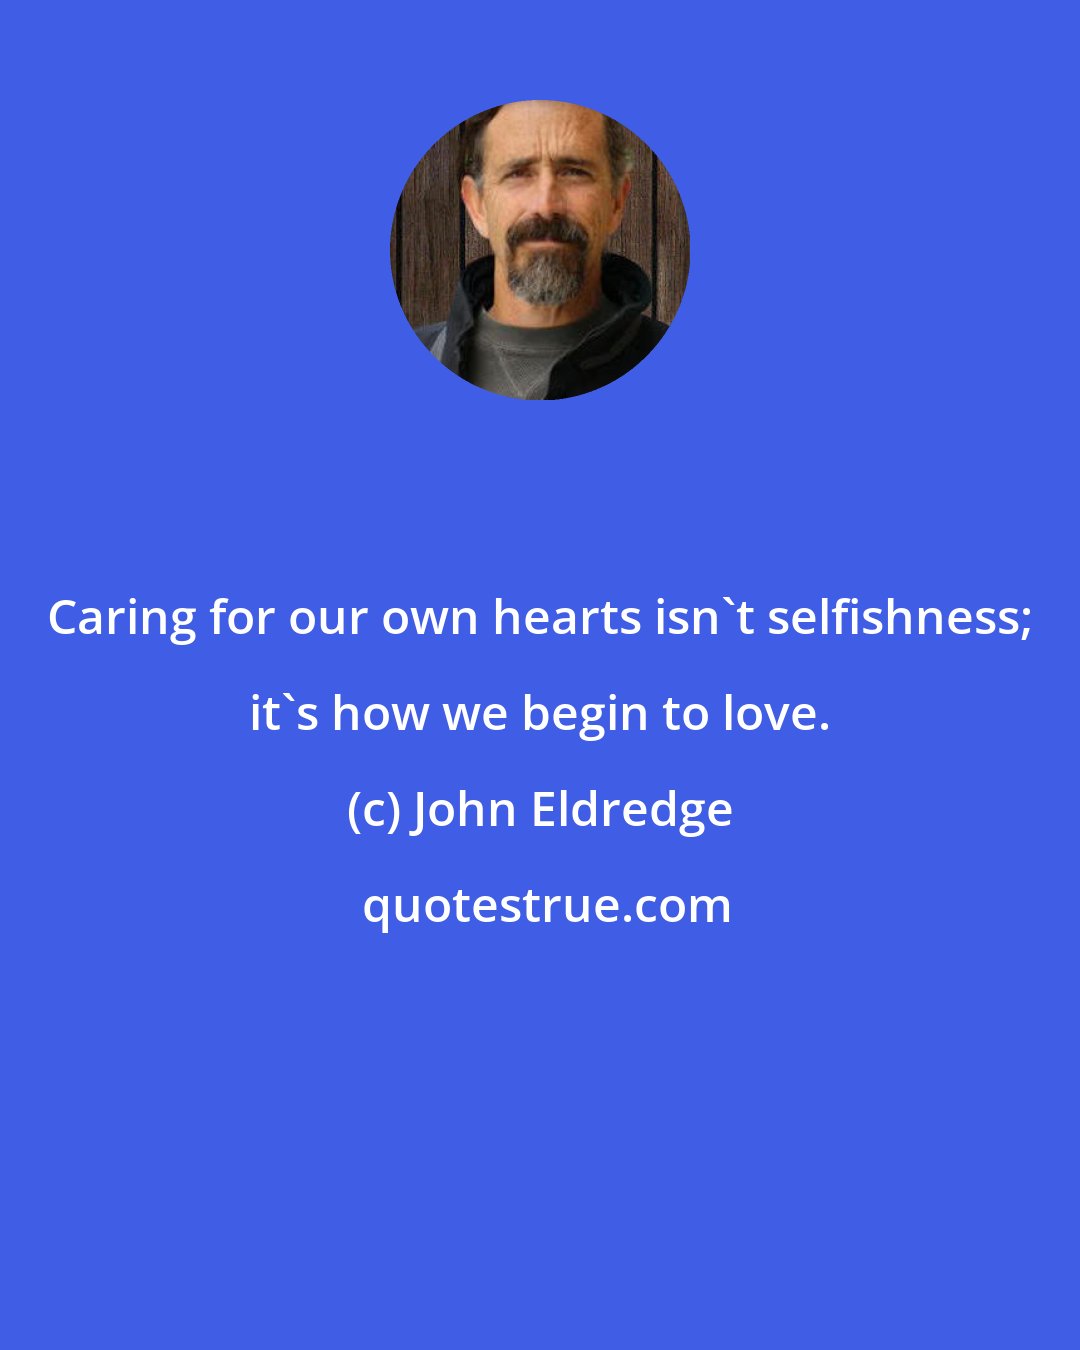 John Eldredge: Caring for our own hearts isn't selfishness; it's how we begin to love.